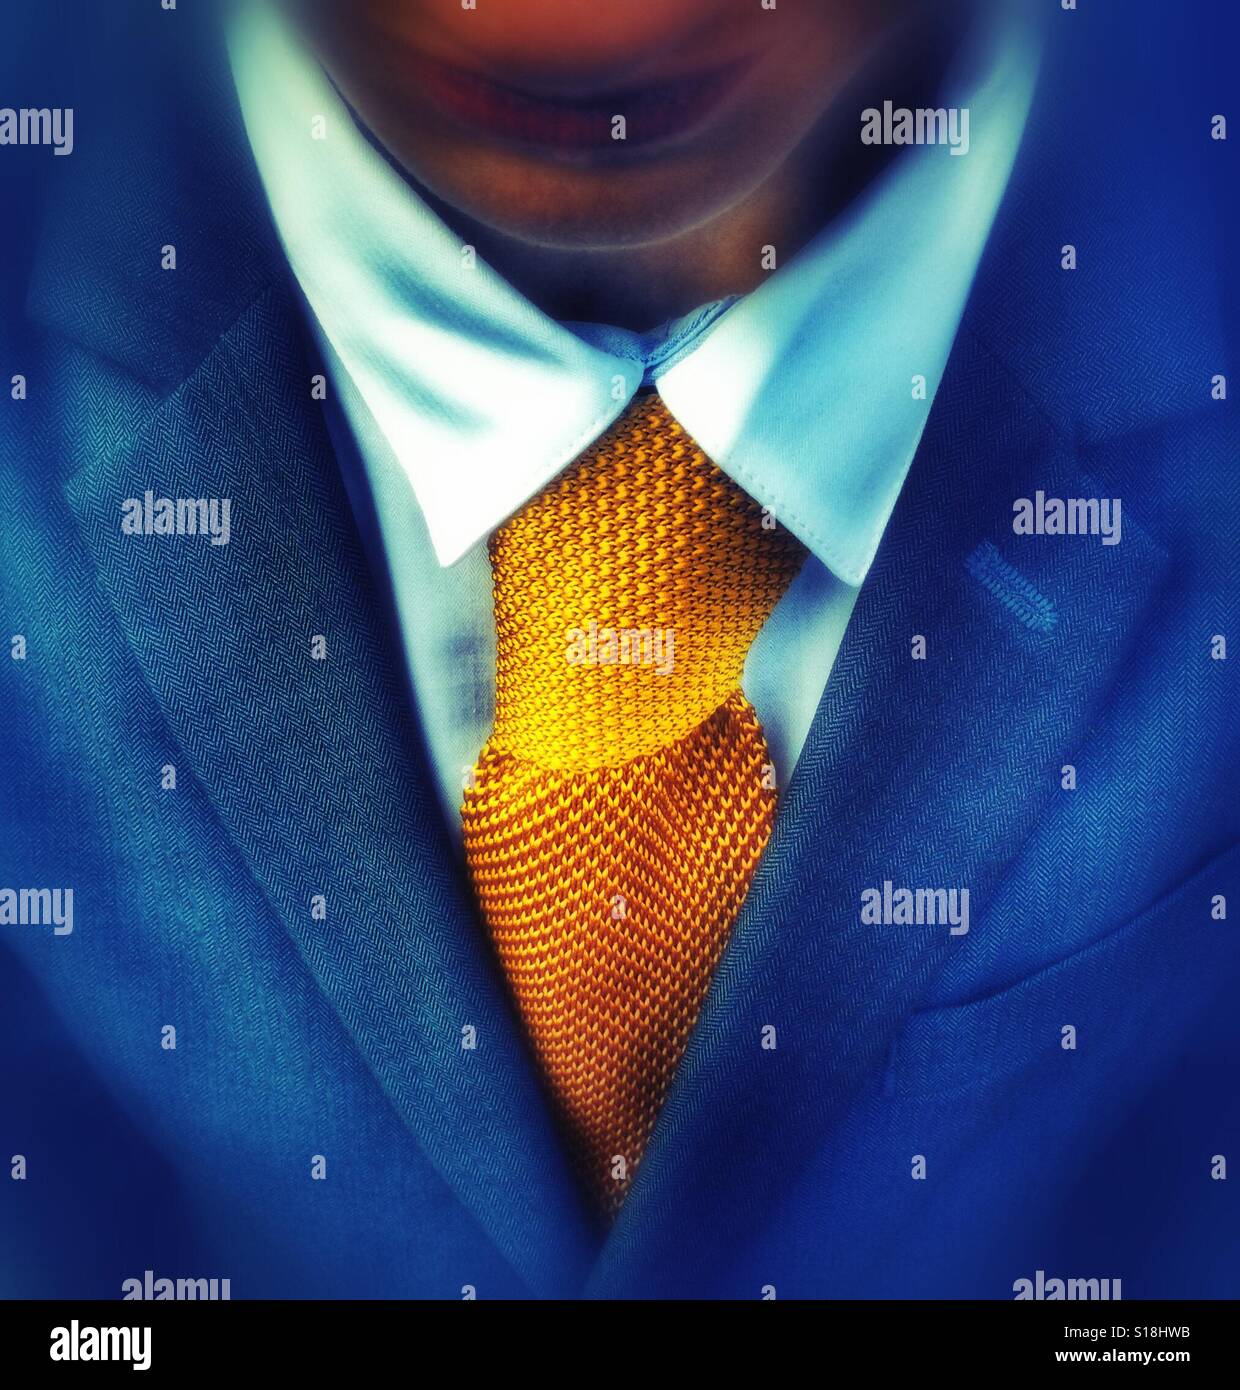 A boy wearing a suit with a bright yellow tie Stock Photo